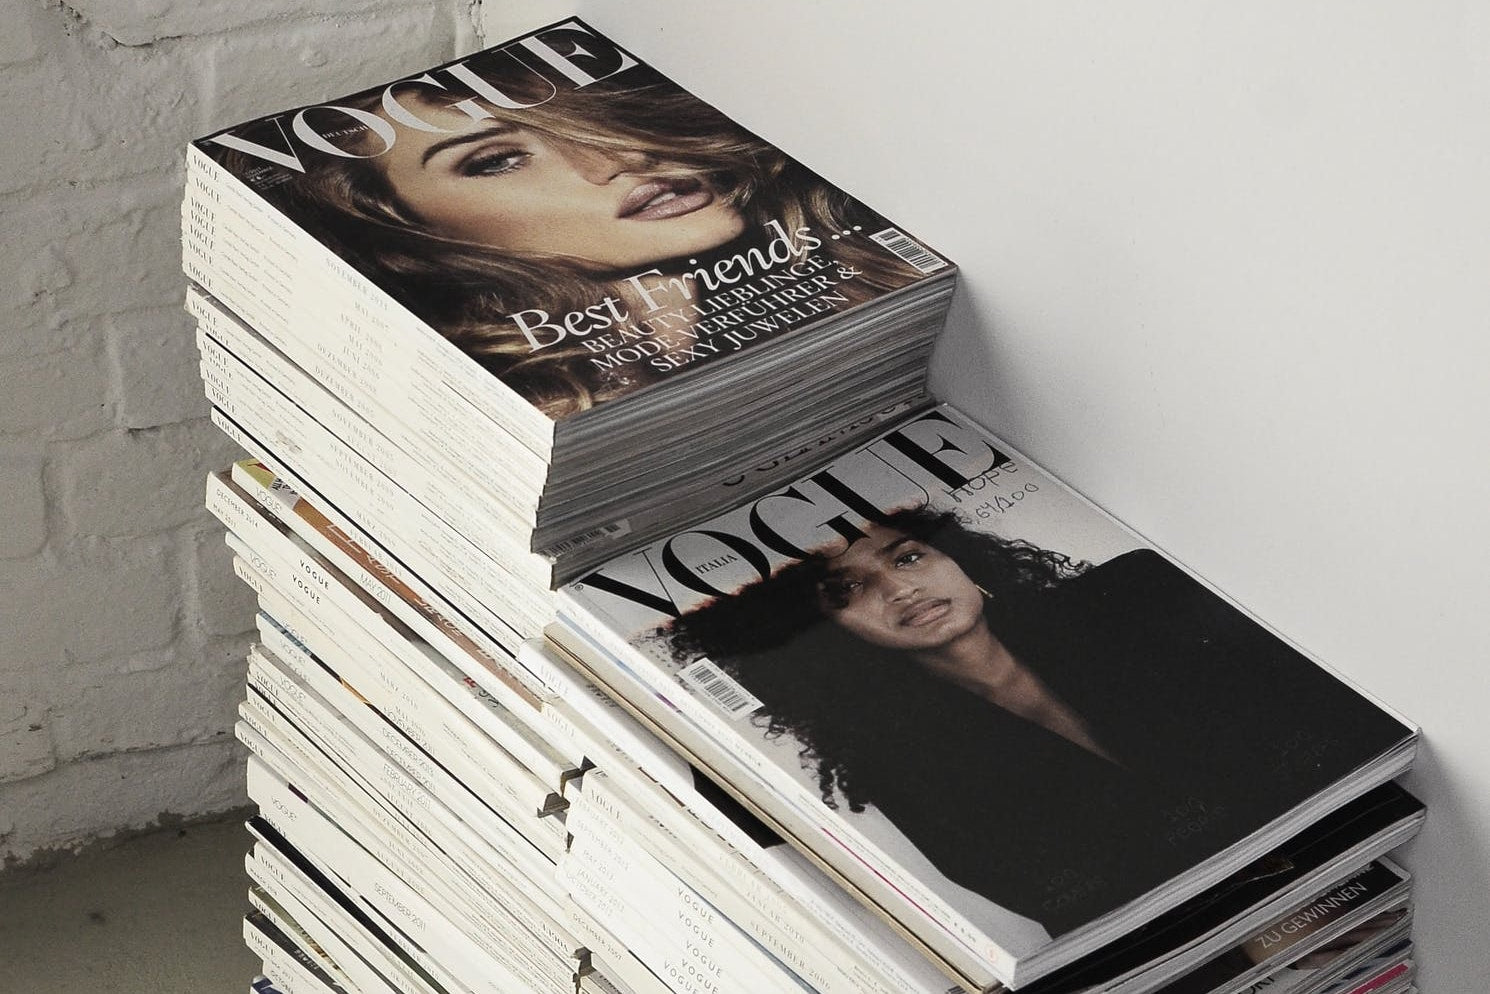 Press page hero image featuring stack of Vogue magazines